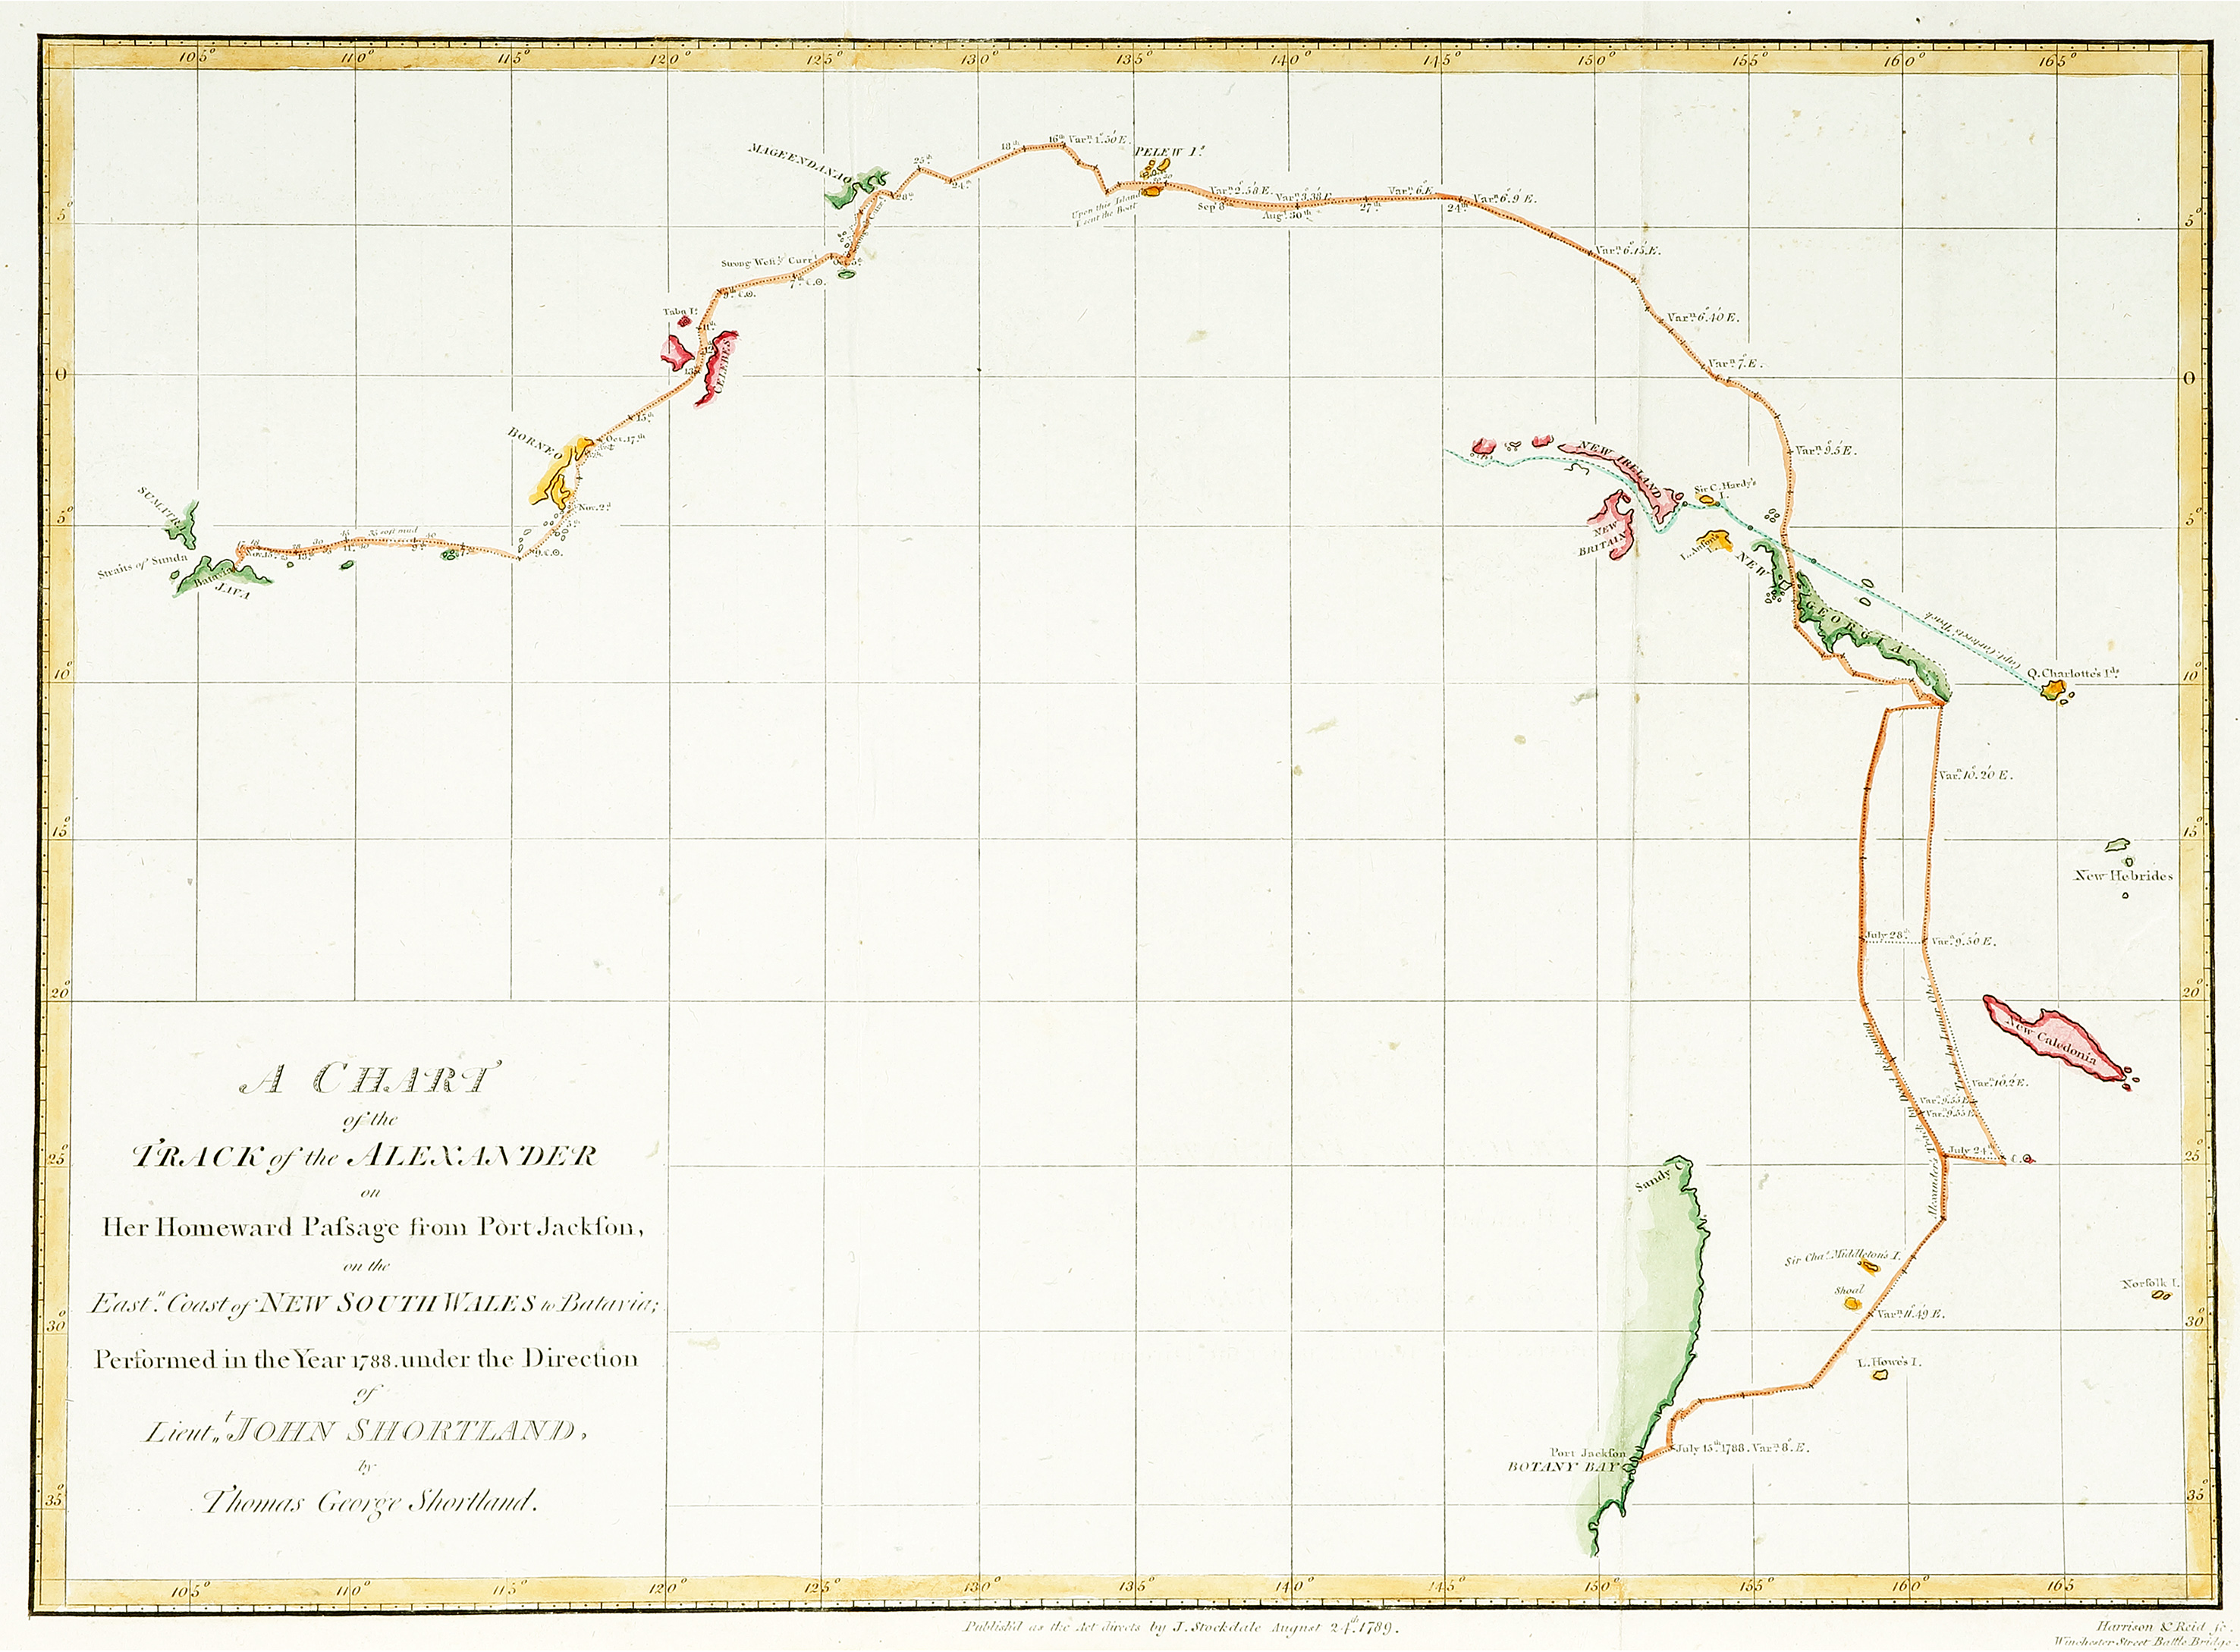 A Chart of The Track of the Alexander on Her Homeward Package from Port Jackson, East Coast of new South Wales to Batavia; Performed in the Year 1788 under the Direction of lieut. John Shortland. - Antique Map from 1789